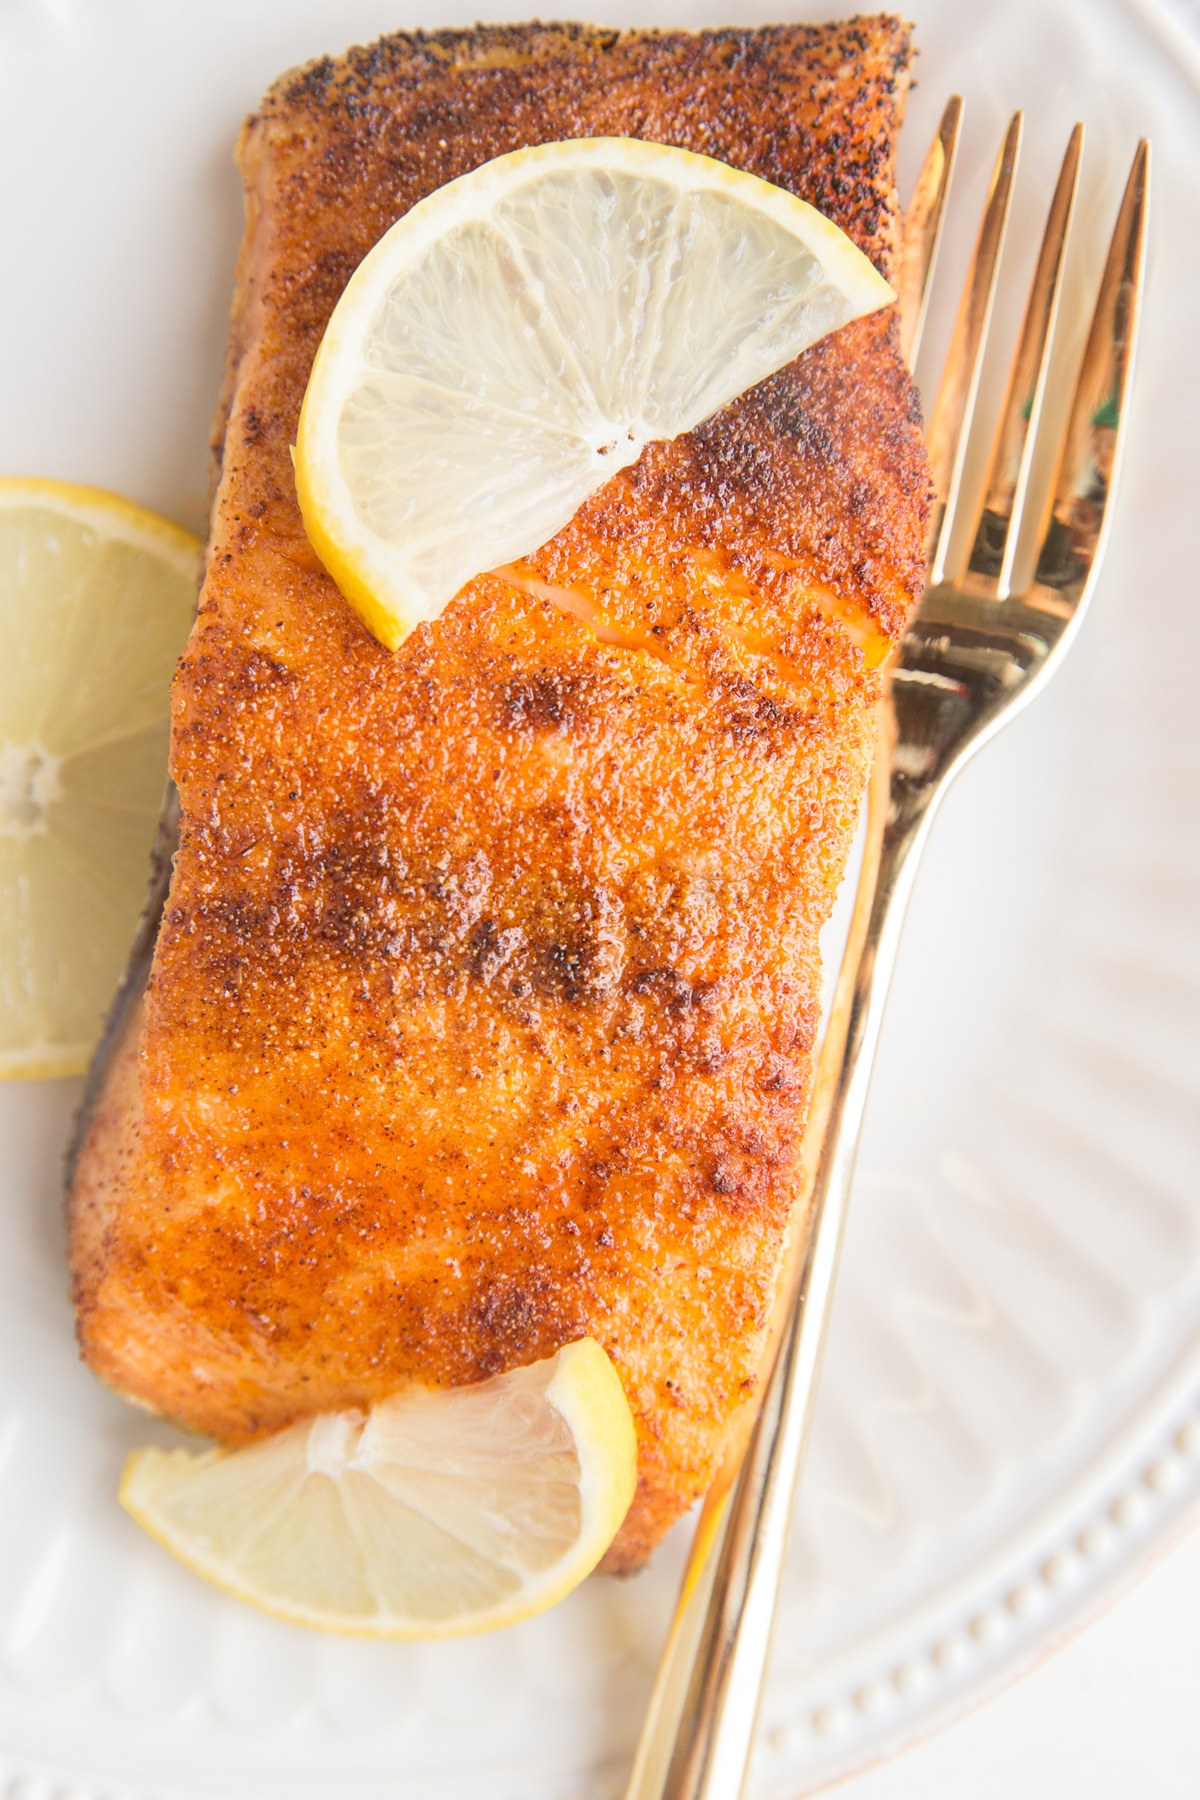 Crispy Air Fryer Salmon - a quick, easy, amazing method for cooking salmon!